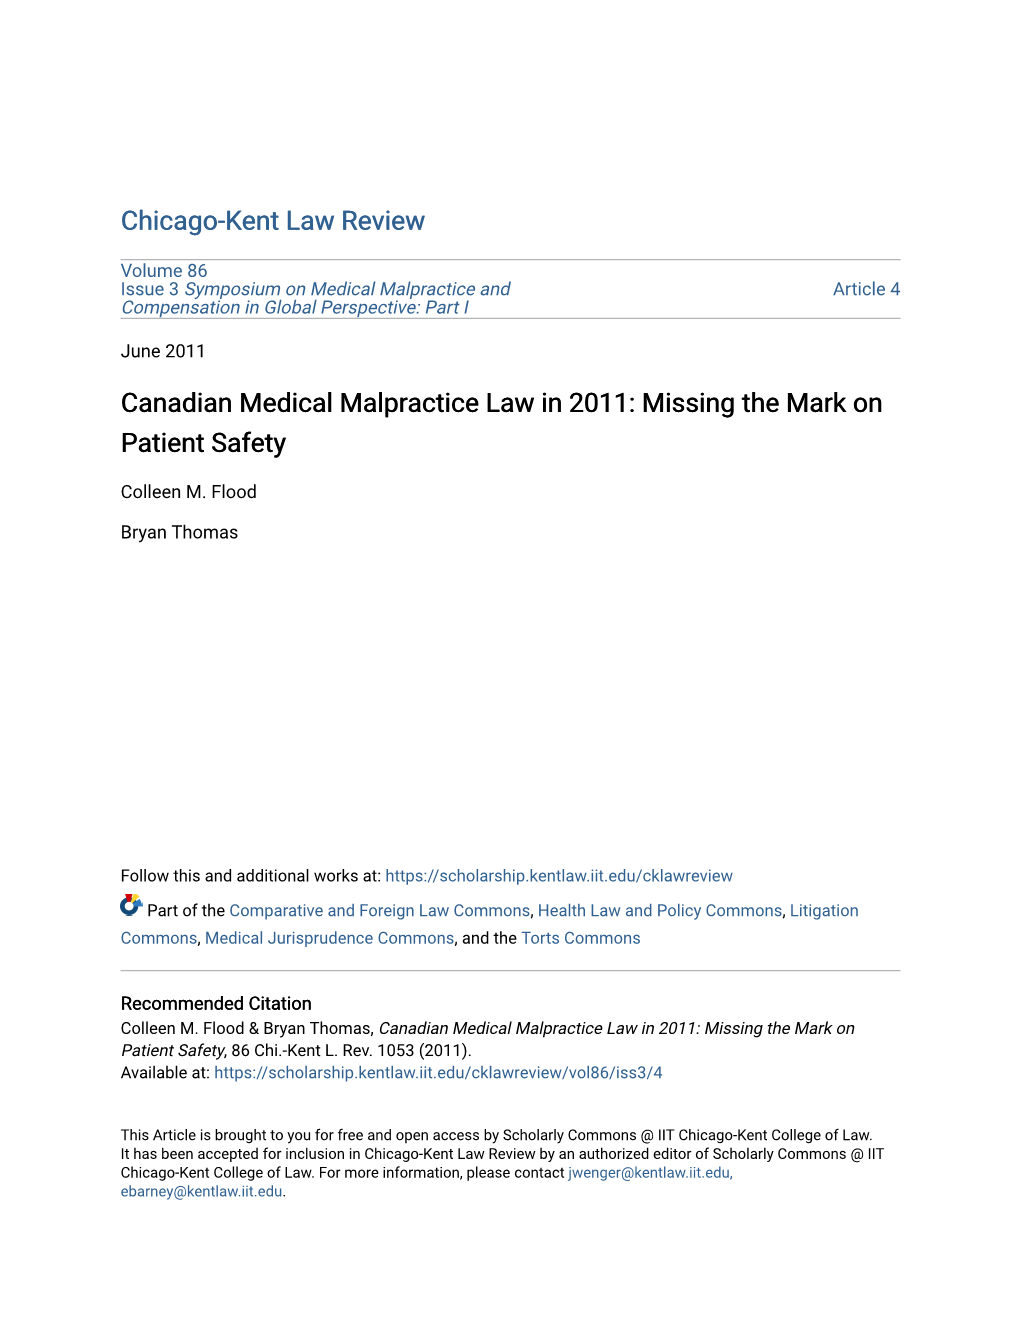 Canadian Medical Malpractice Law in 2011: Missing the Mark on Patient Safety